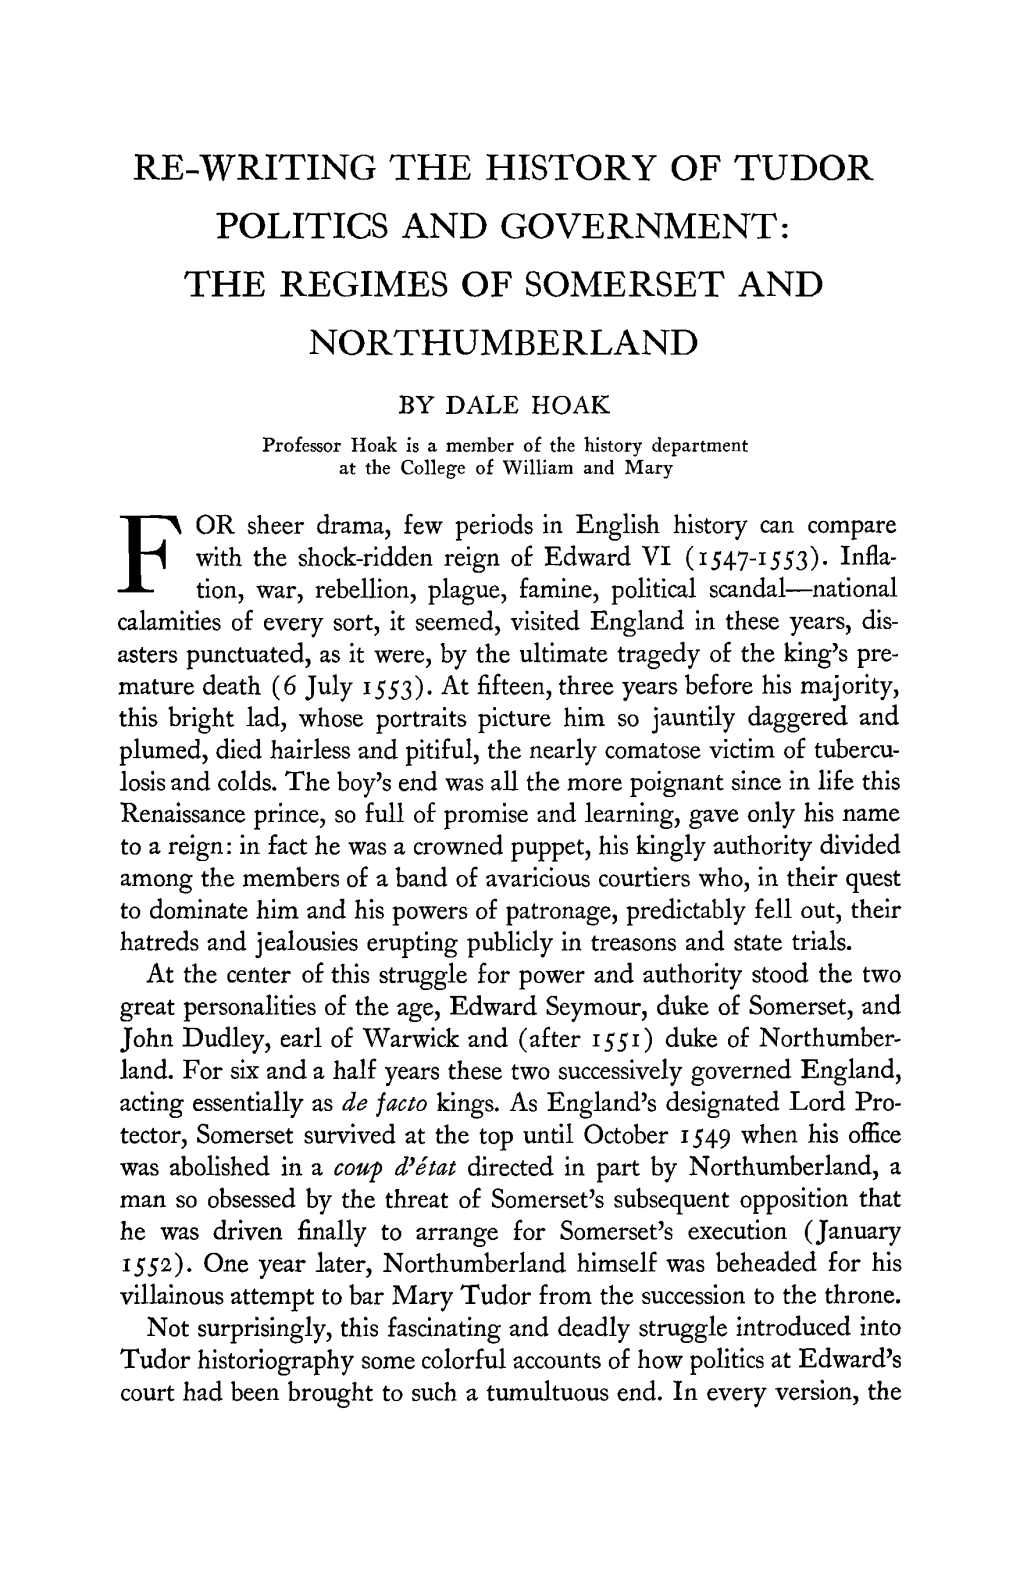 The Regimes of Somerset and Northumberland